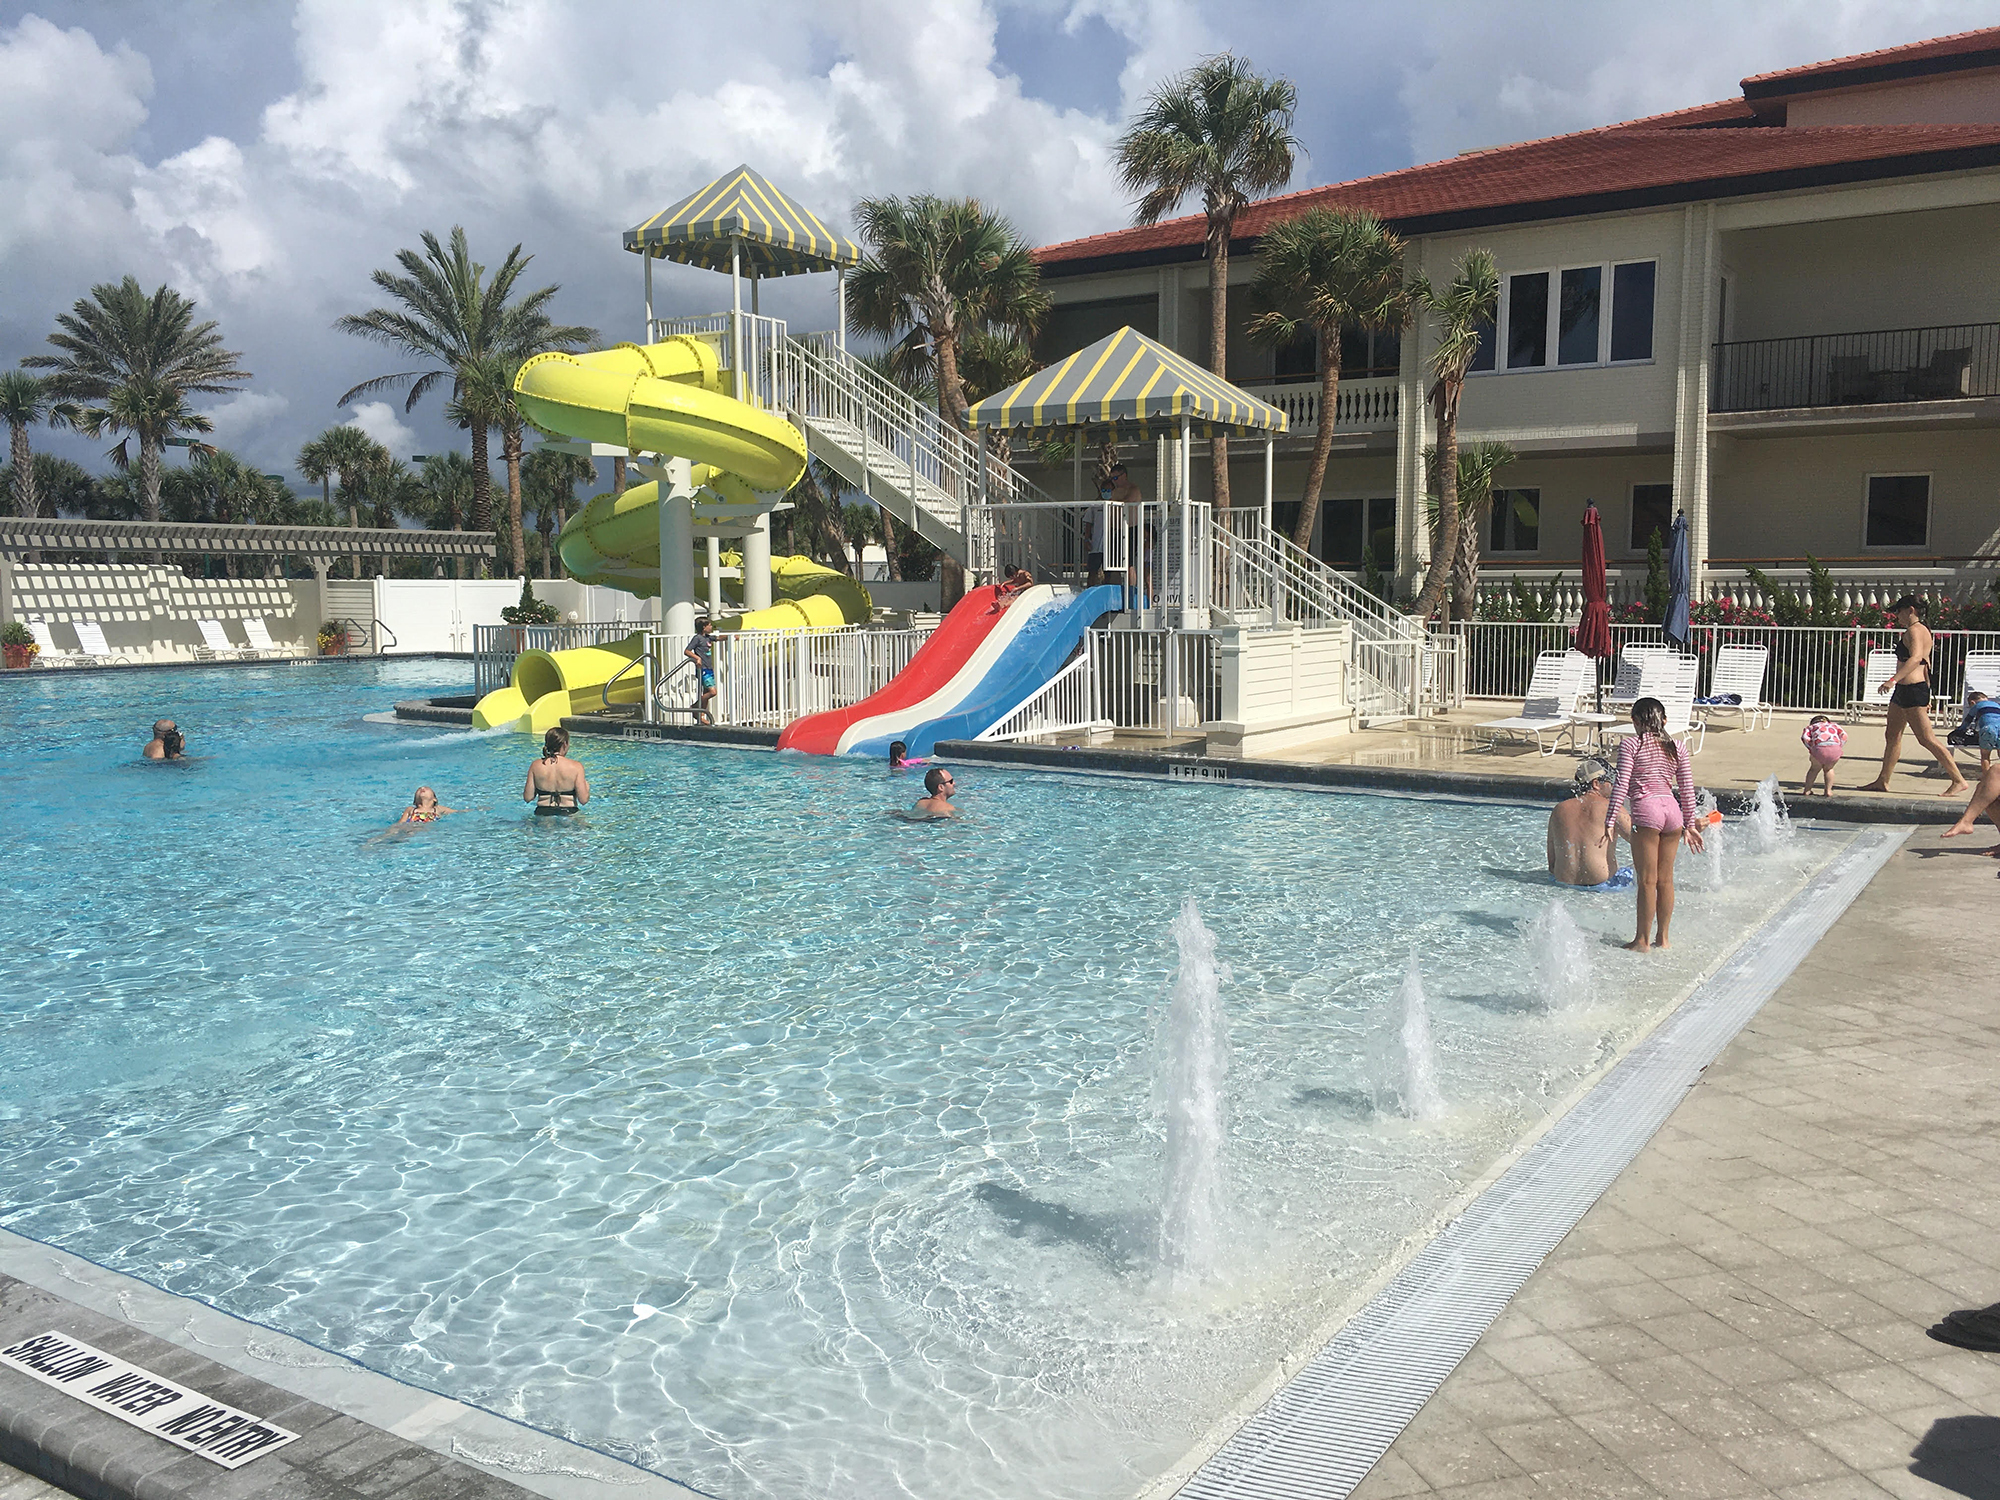 The Ponte Vedra Inn & Club added a zero entry area, fountains and slides to its family pool.